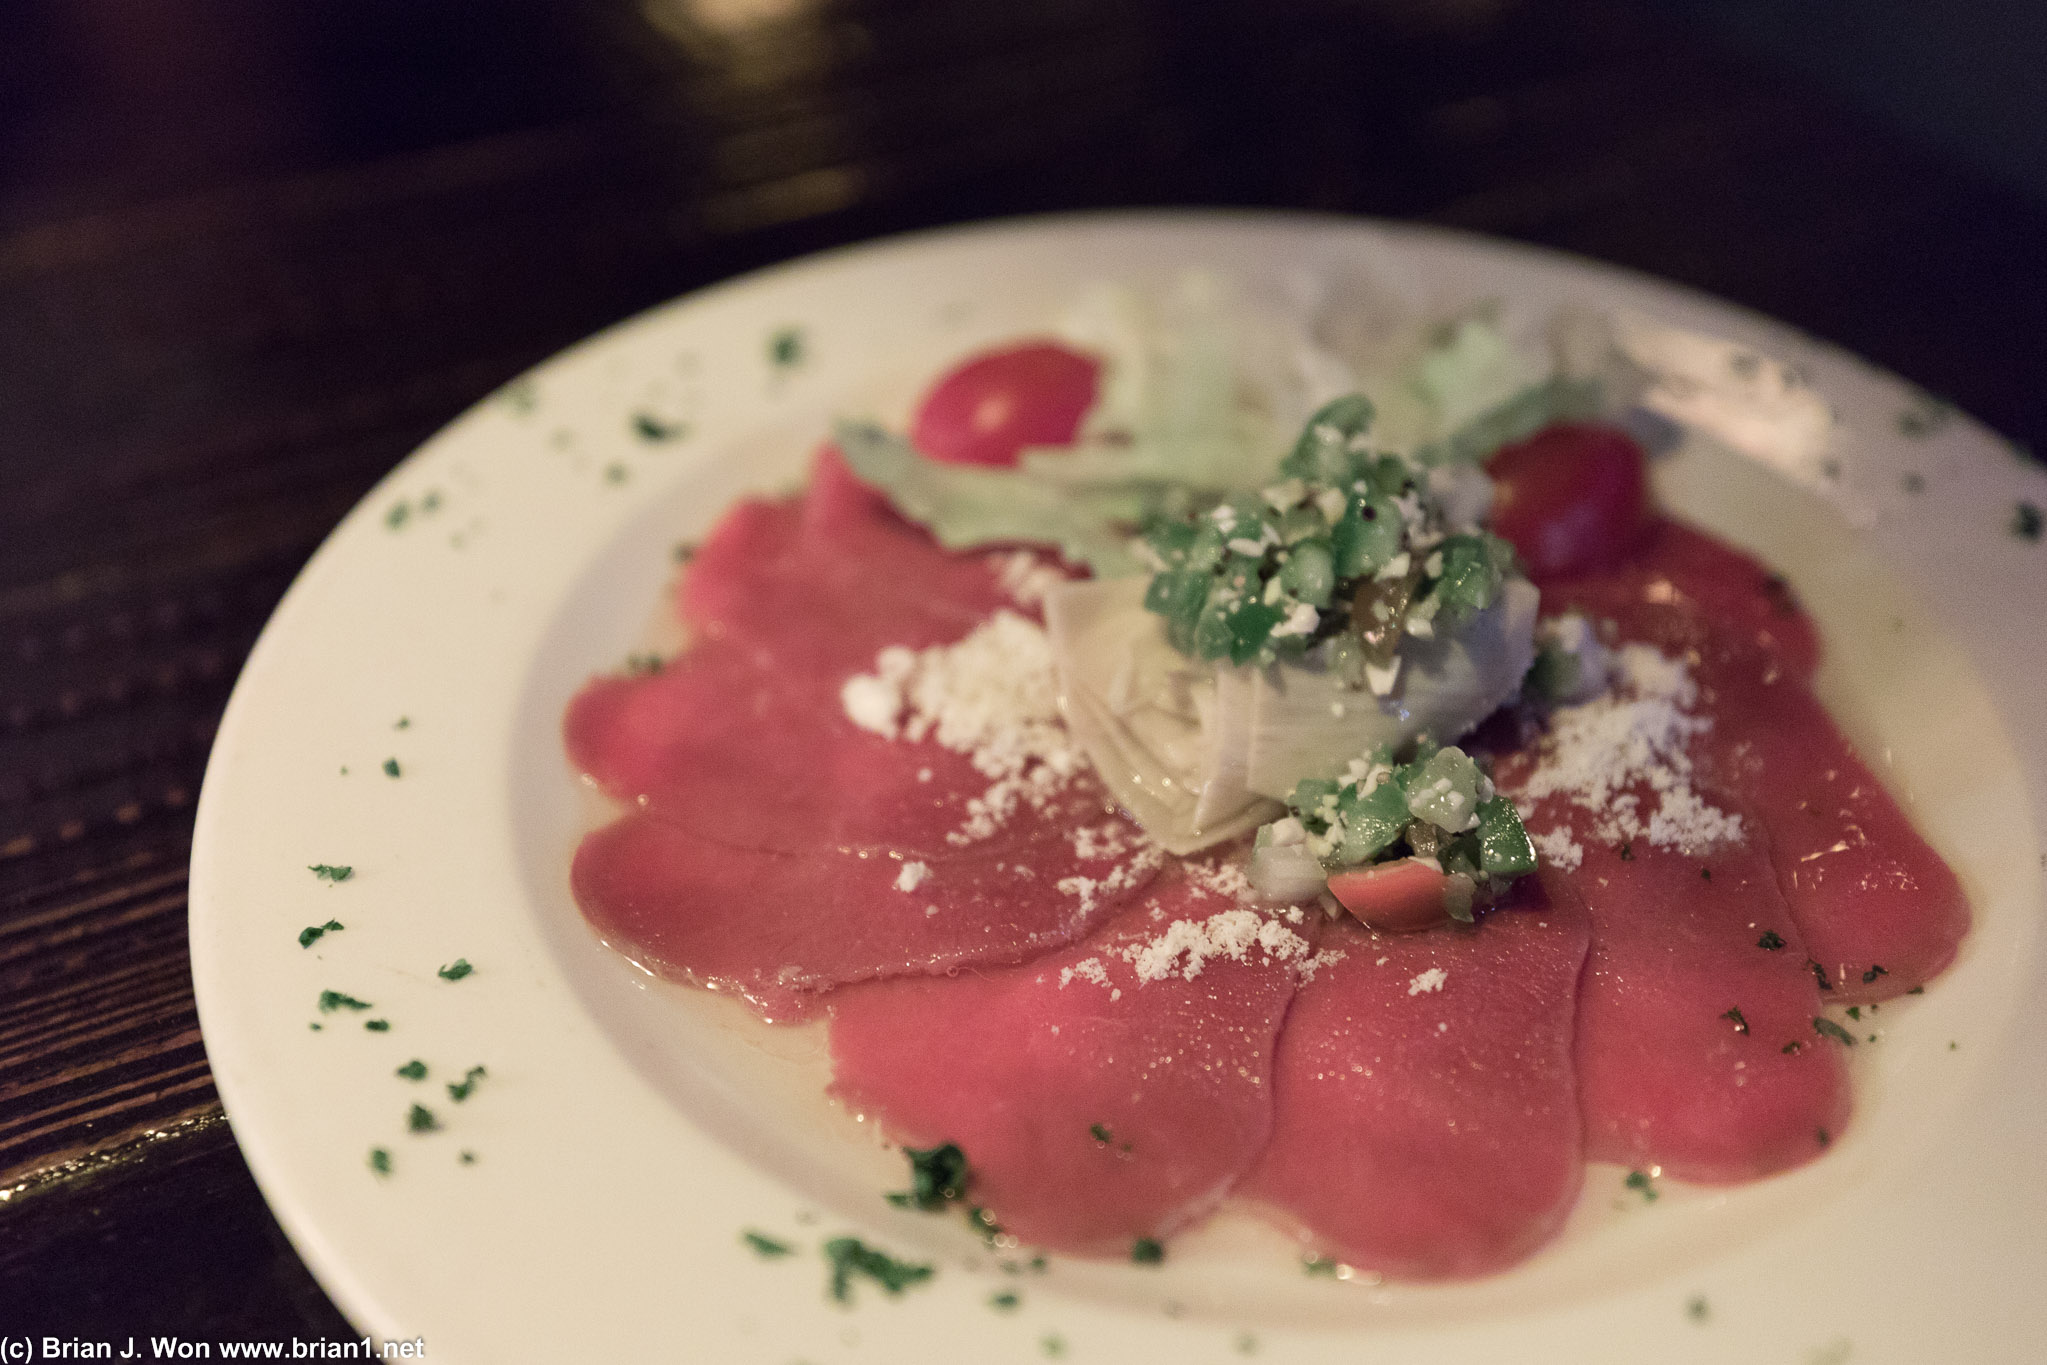 Oryx carpaccio. Pretty meaty, not much else to say.